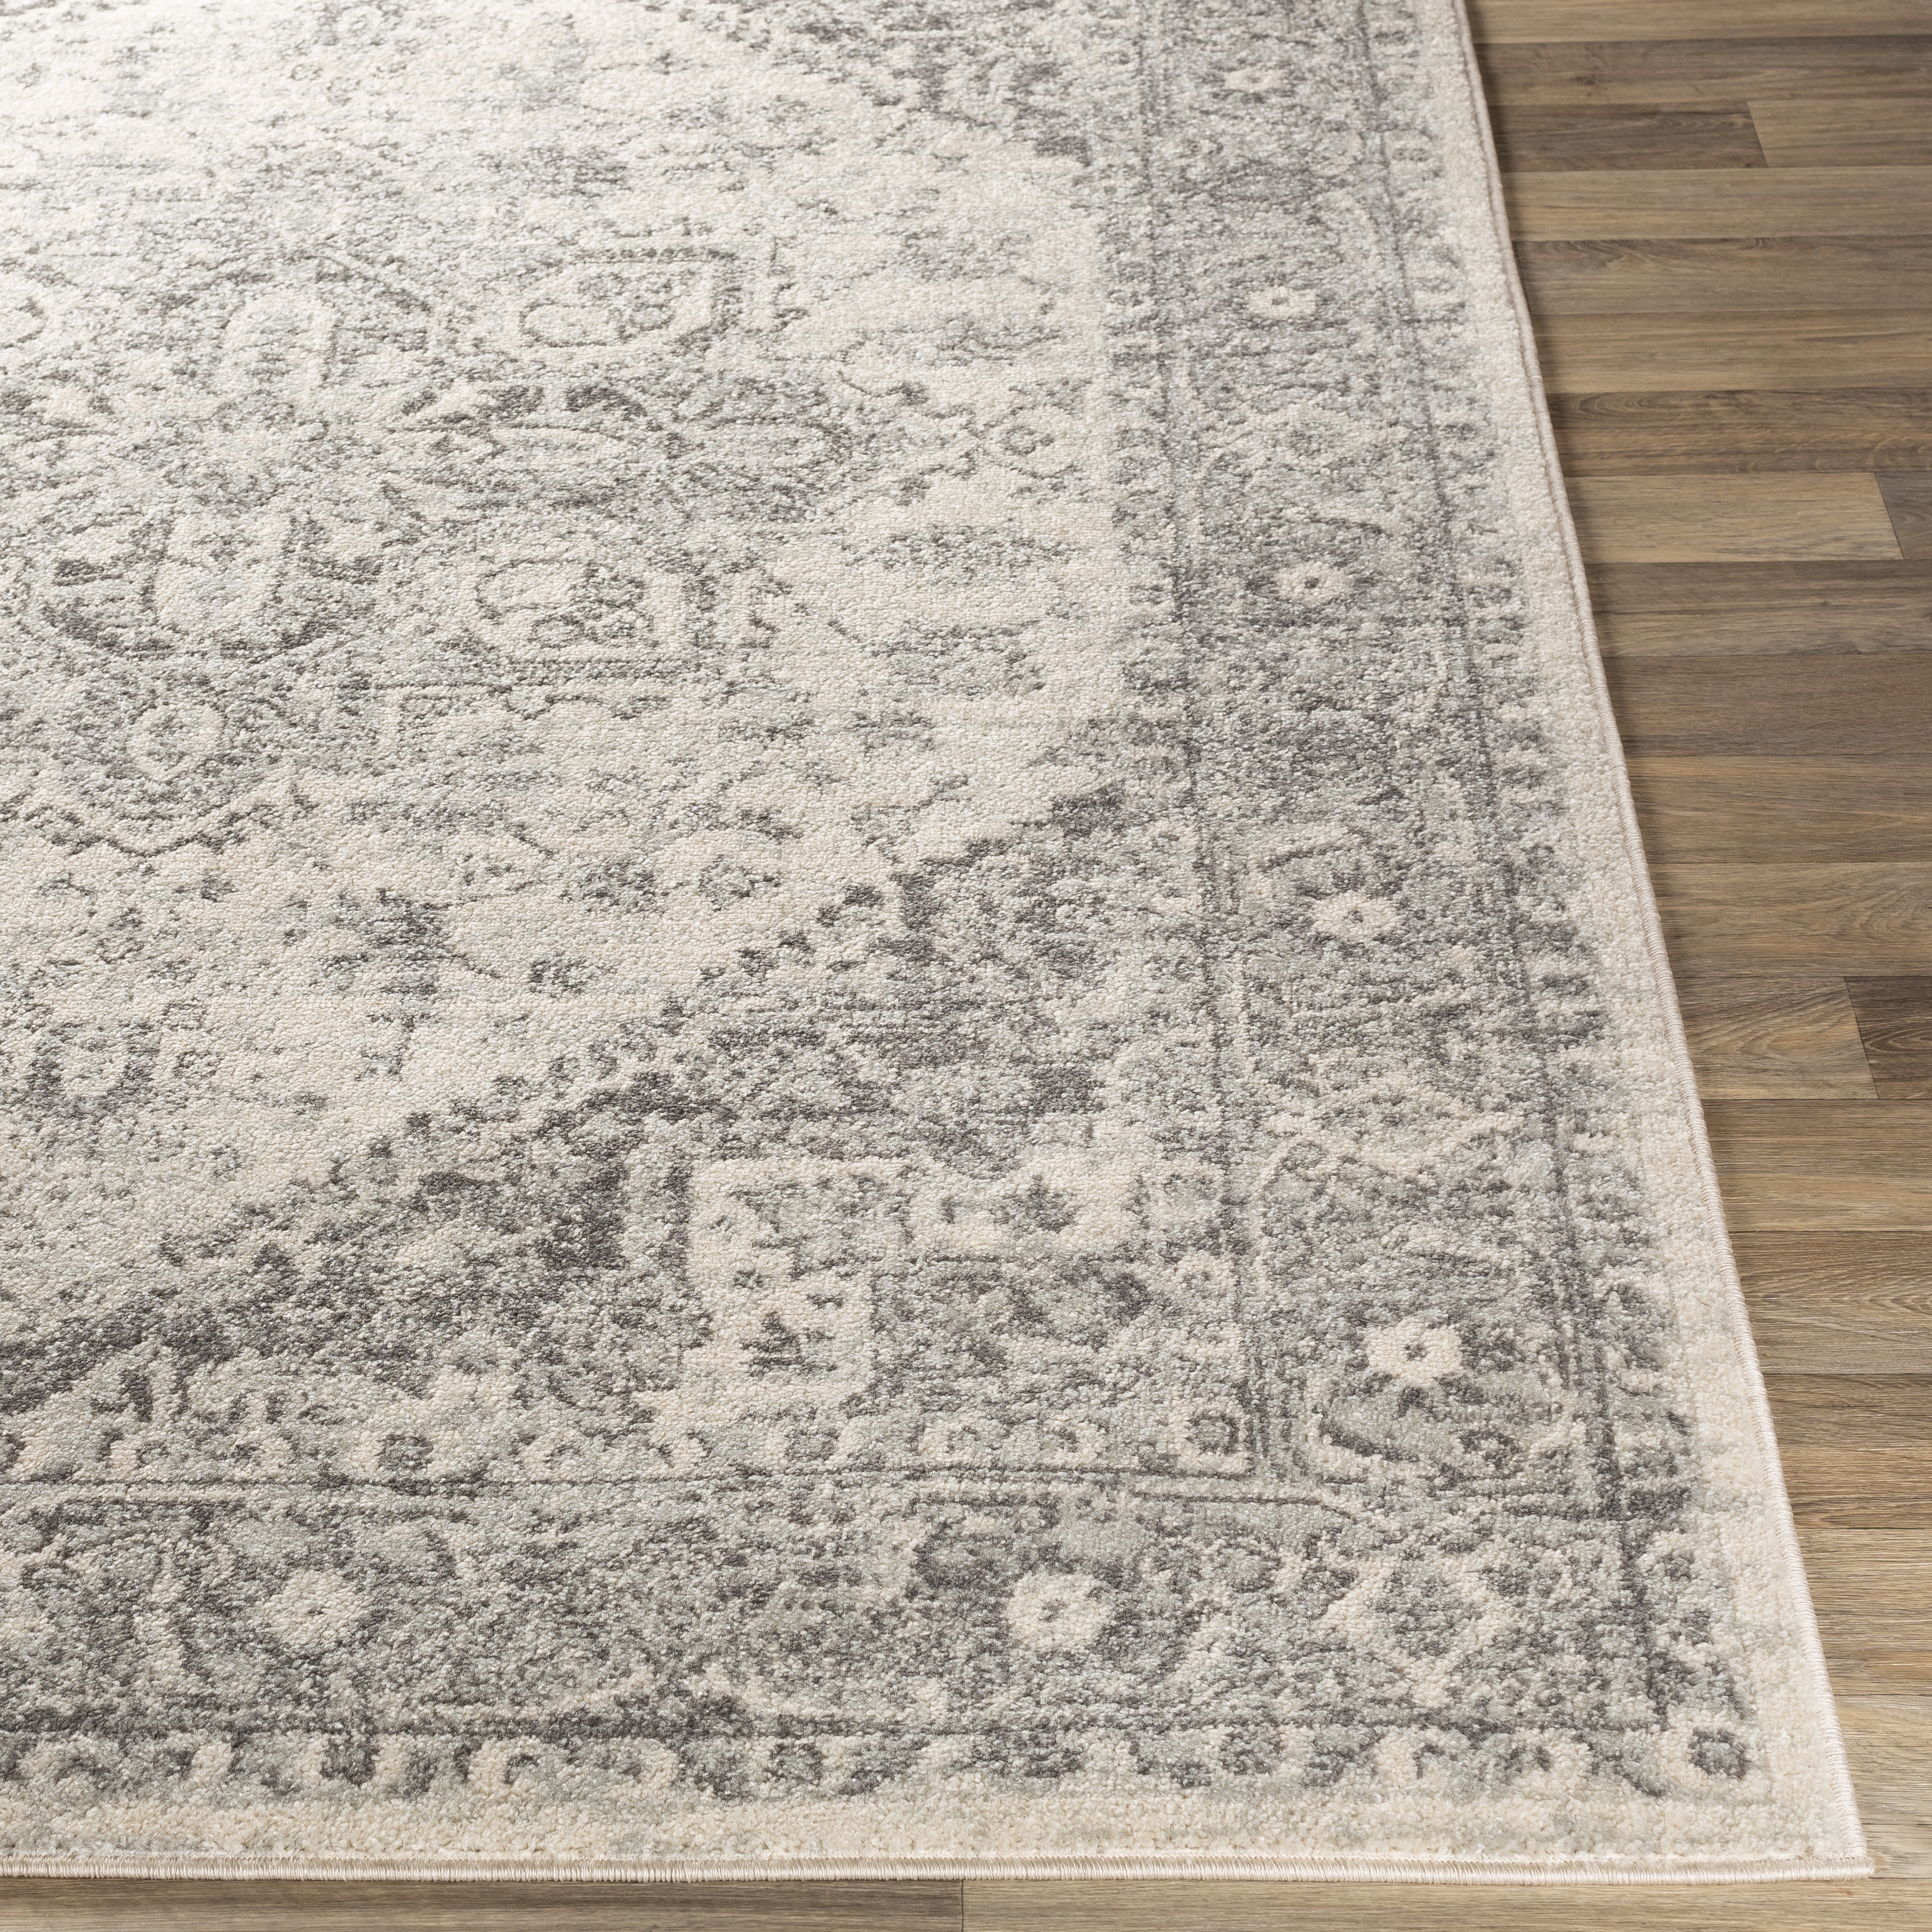 Chester Rug, 2'7" x 7'3" - Image 2